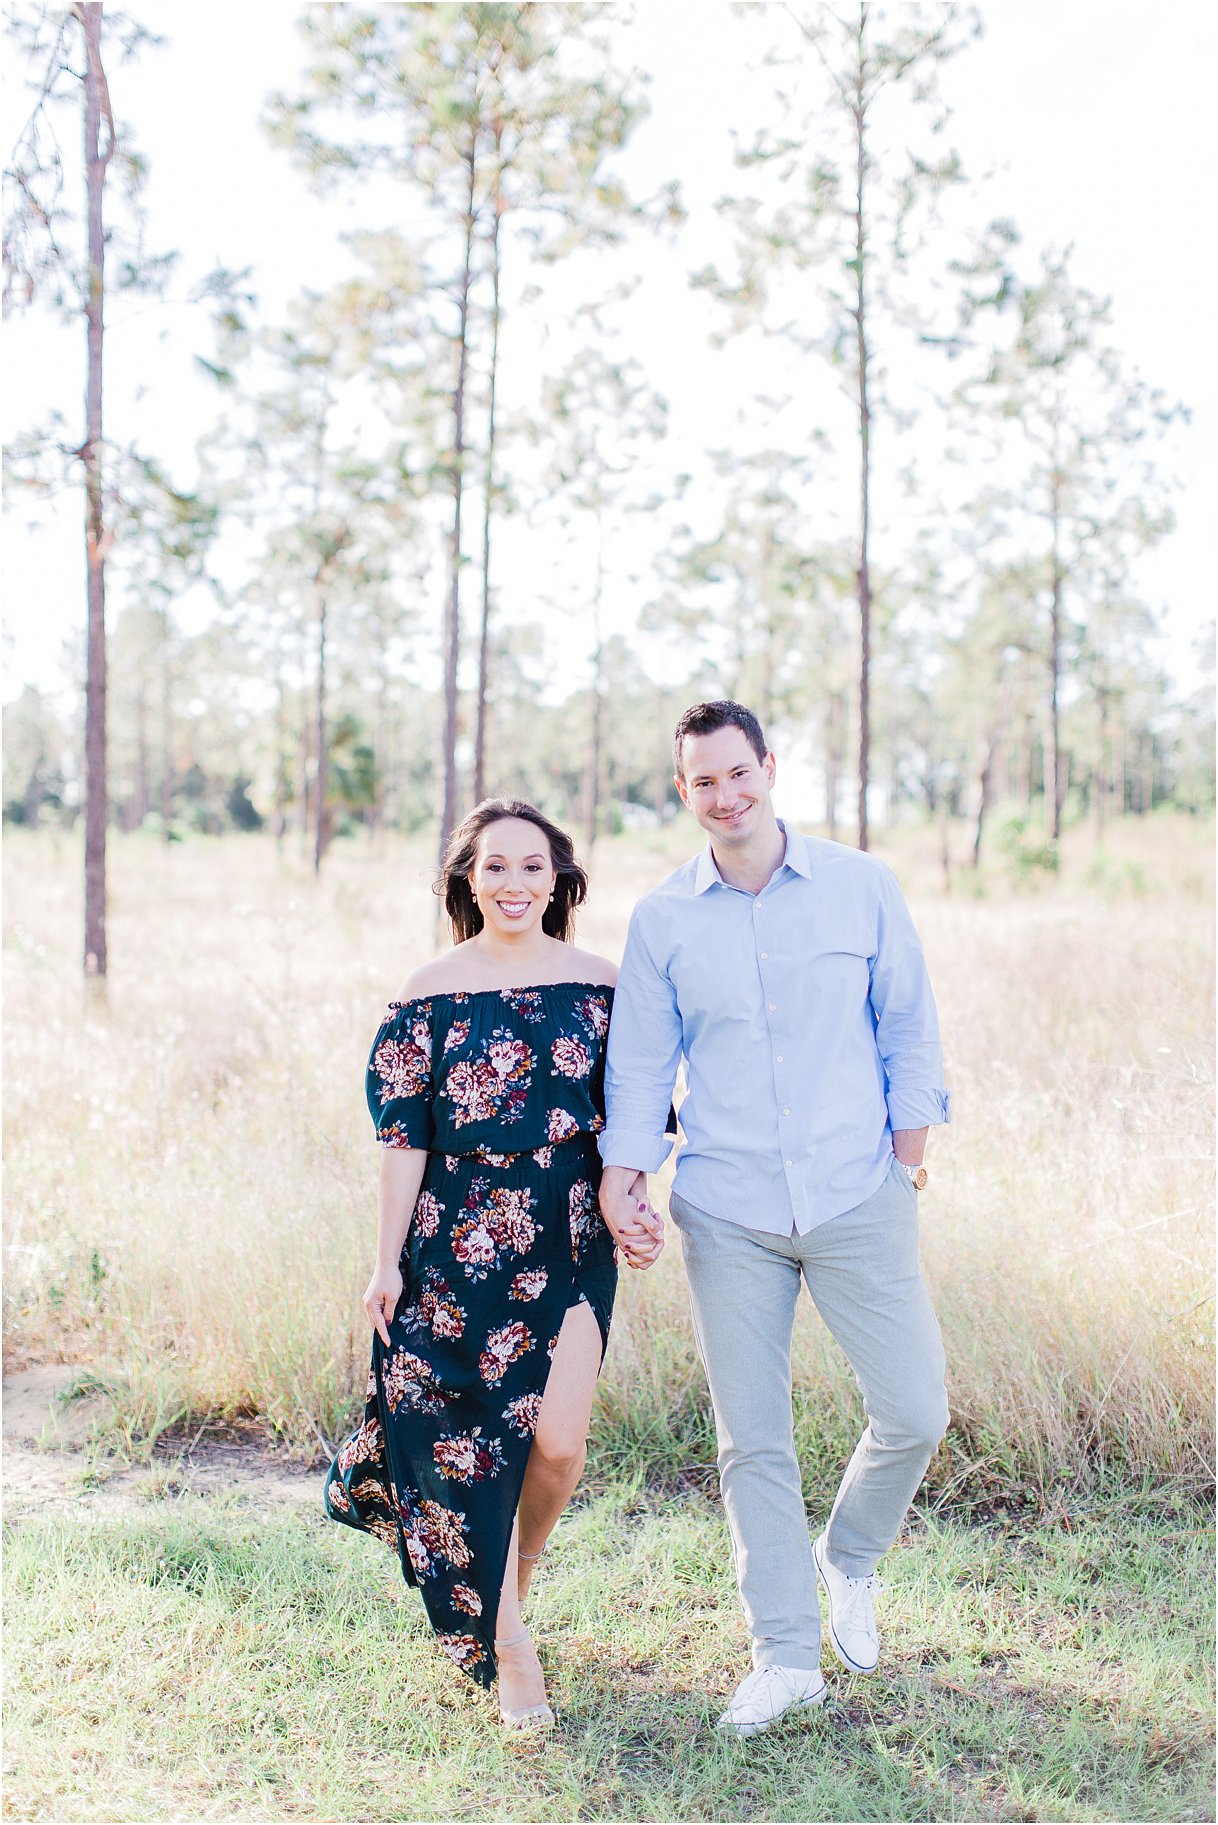 Bok Tower Engagement Session Fall Florida Tampa St Augustine DeLand Wedding Photographer21.jpg